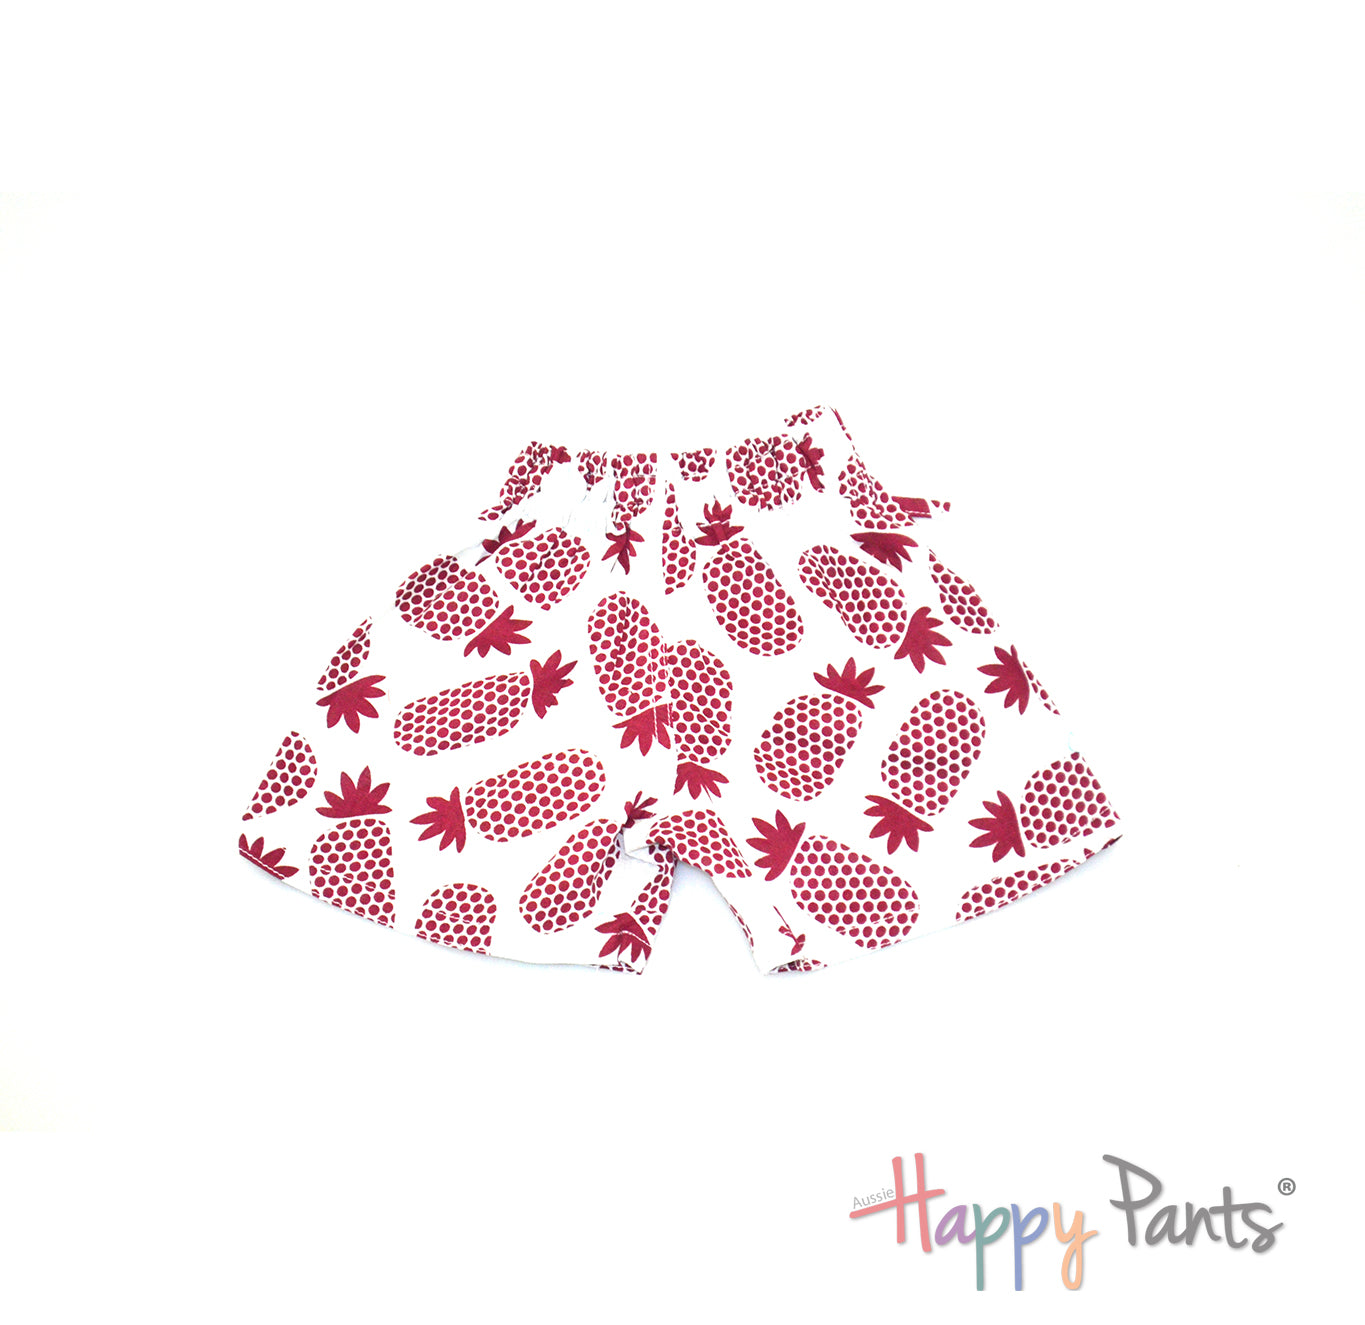 Tropical Pineapples Shorts for Girls